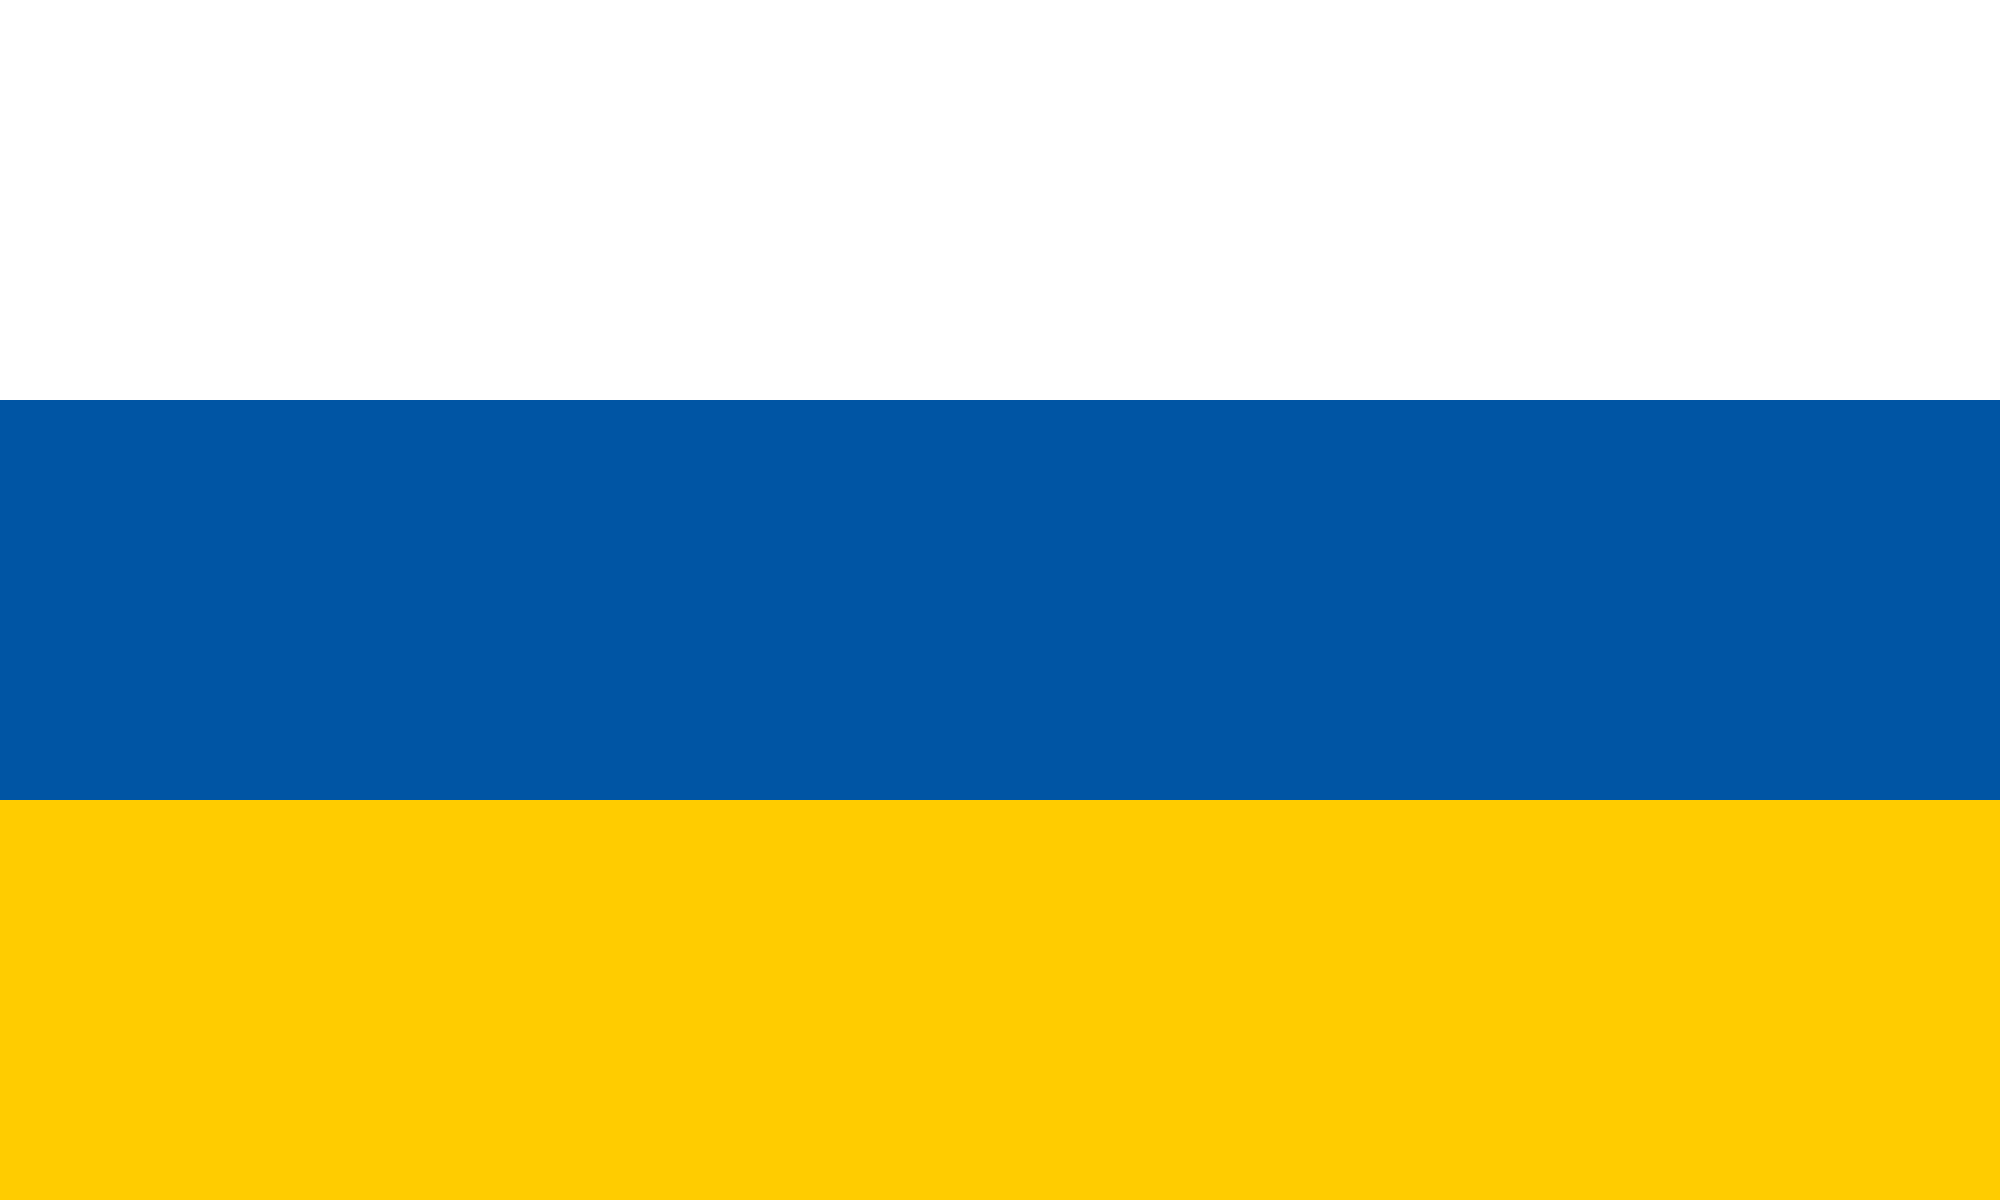 flag_of_all_russia_by_spiritswriter123-da9m6ox.png